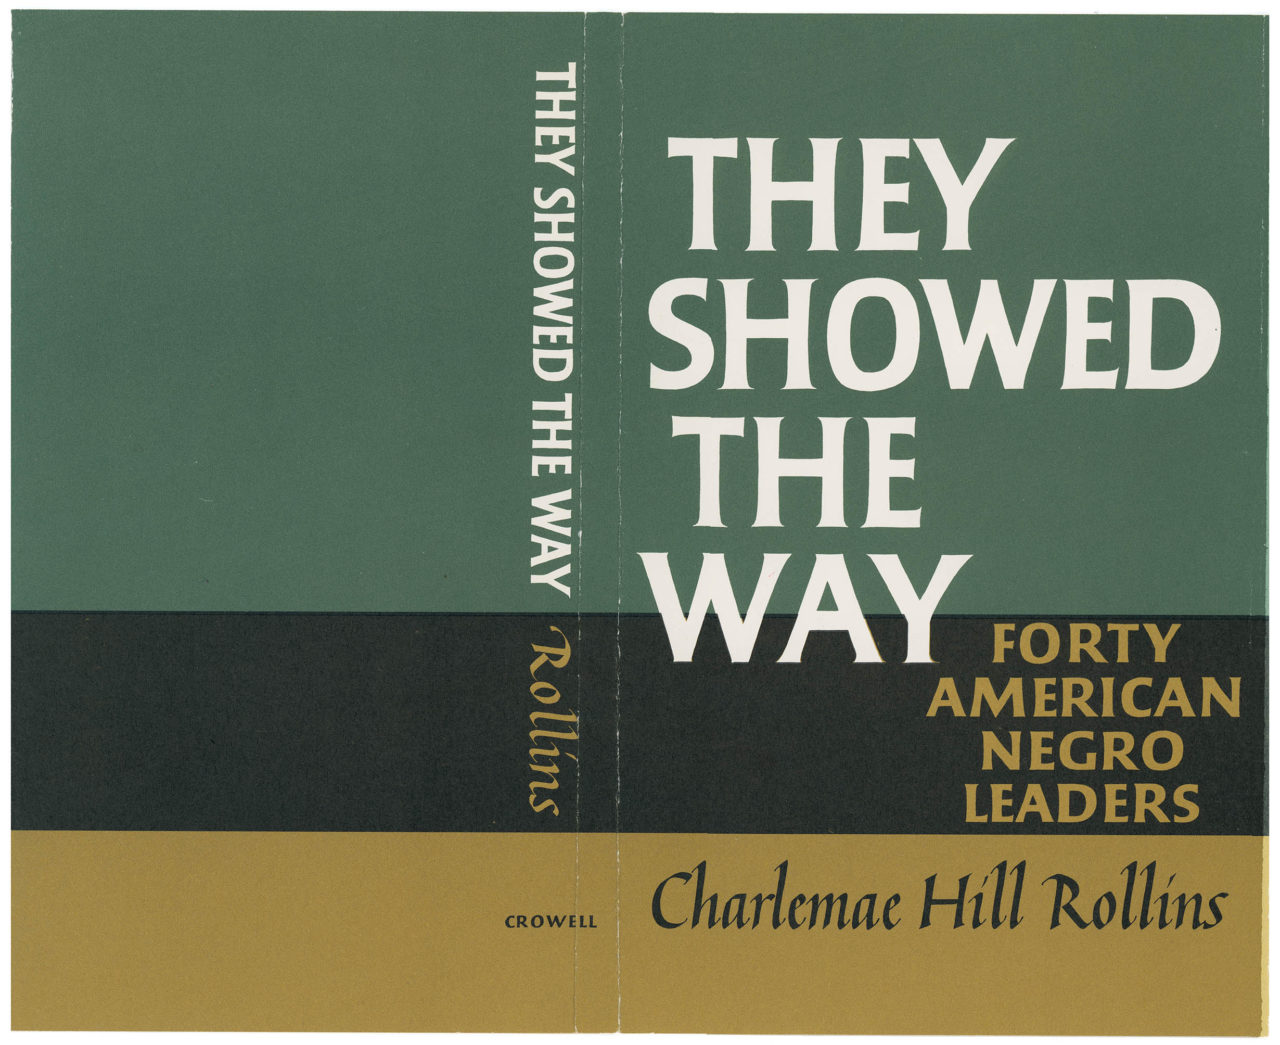 They Showed The Way by Charlemae Hill Rollins